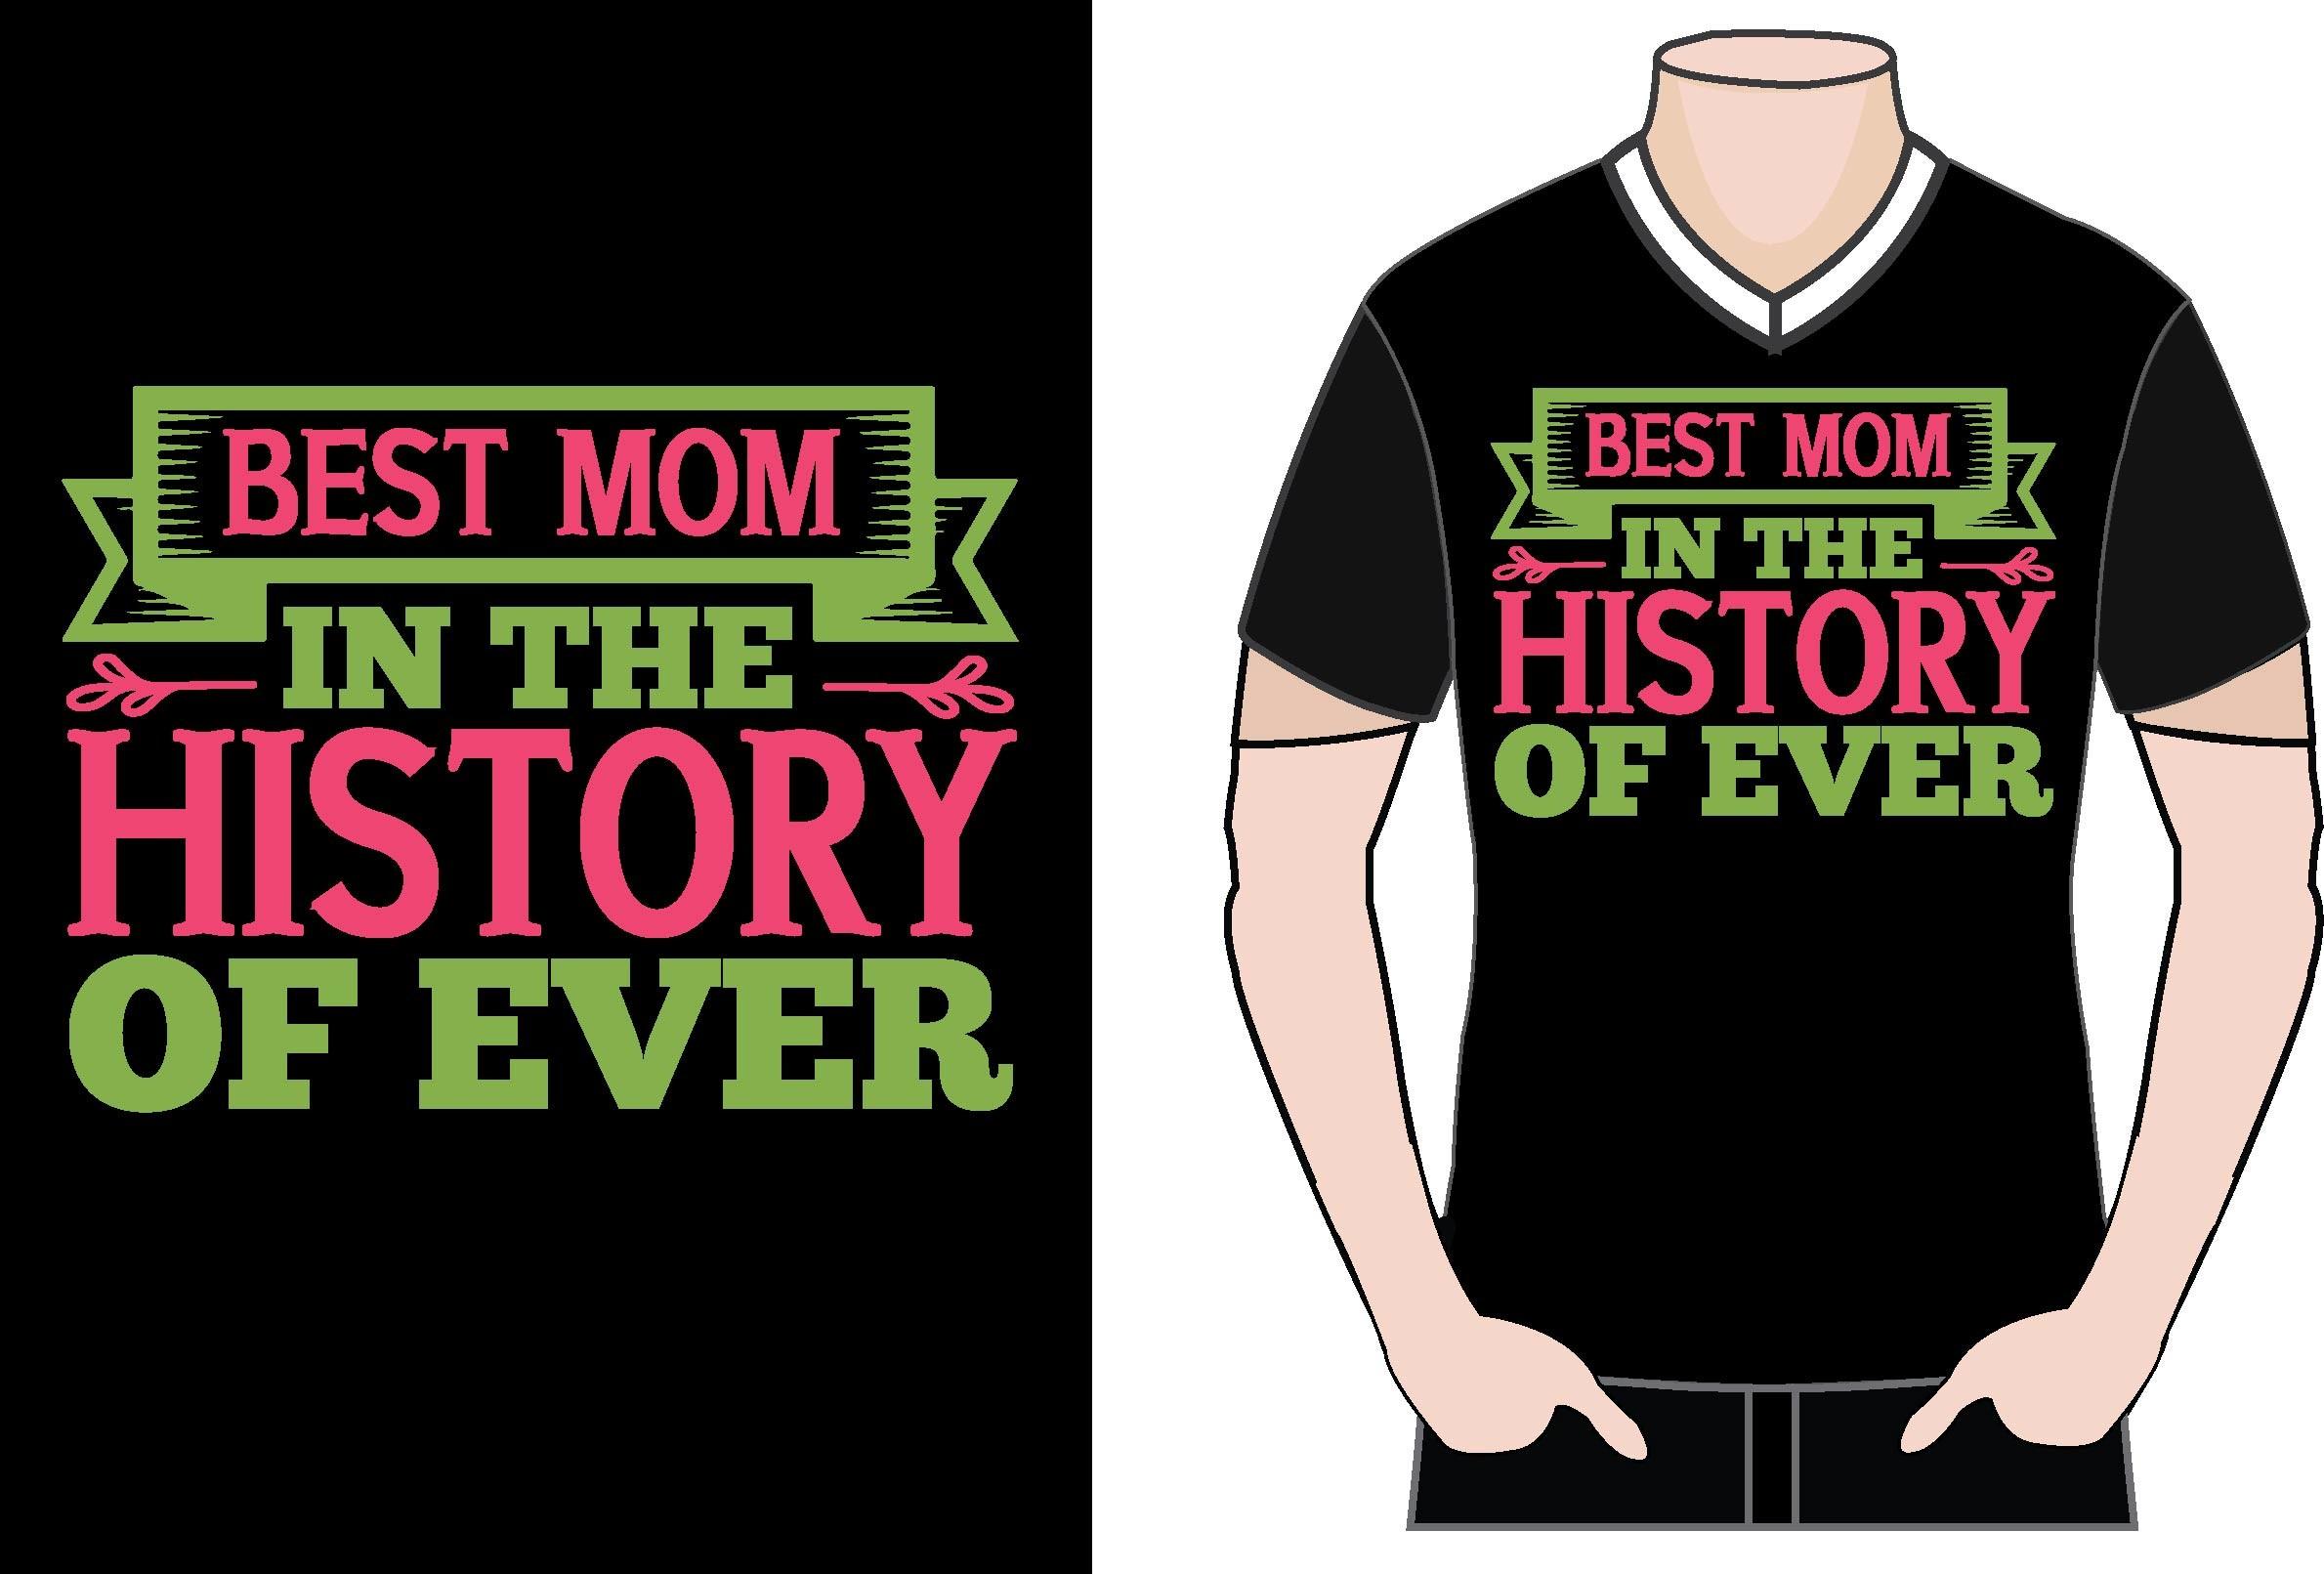 Best Mom in the History Ever Tshirt